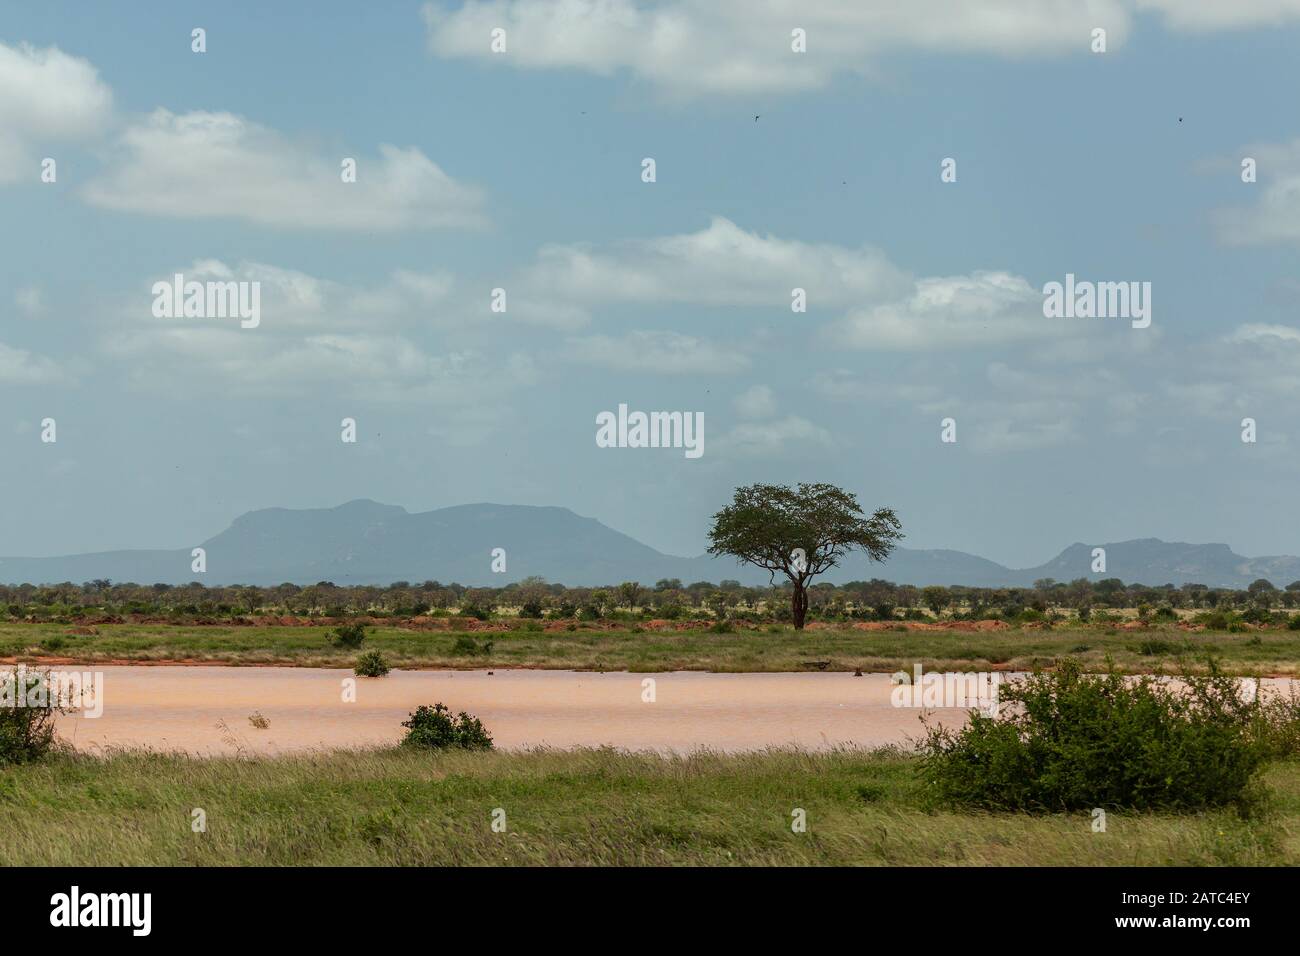 A watering hole with a lonely tree and a mountain hiding in mist (Kenya, Tsavo East National Park) Stock Photo